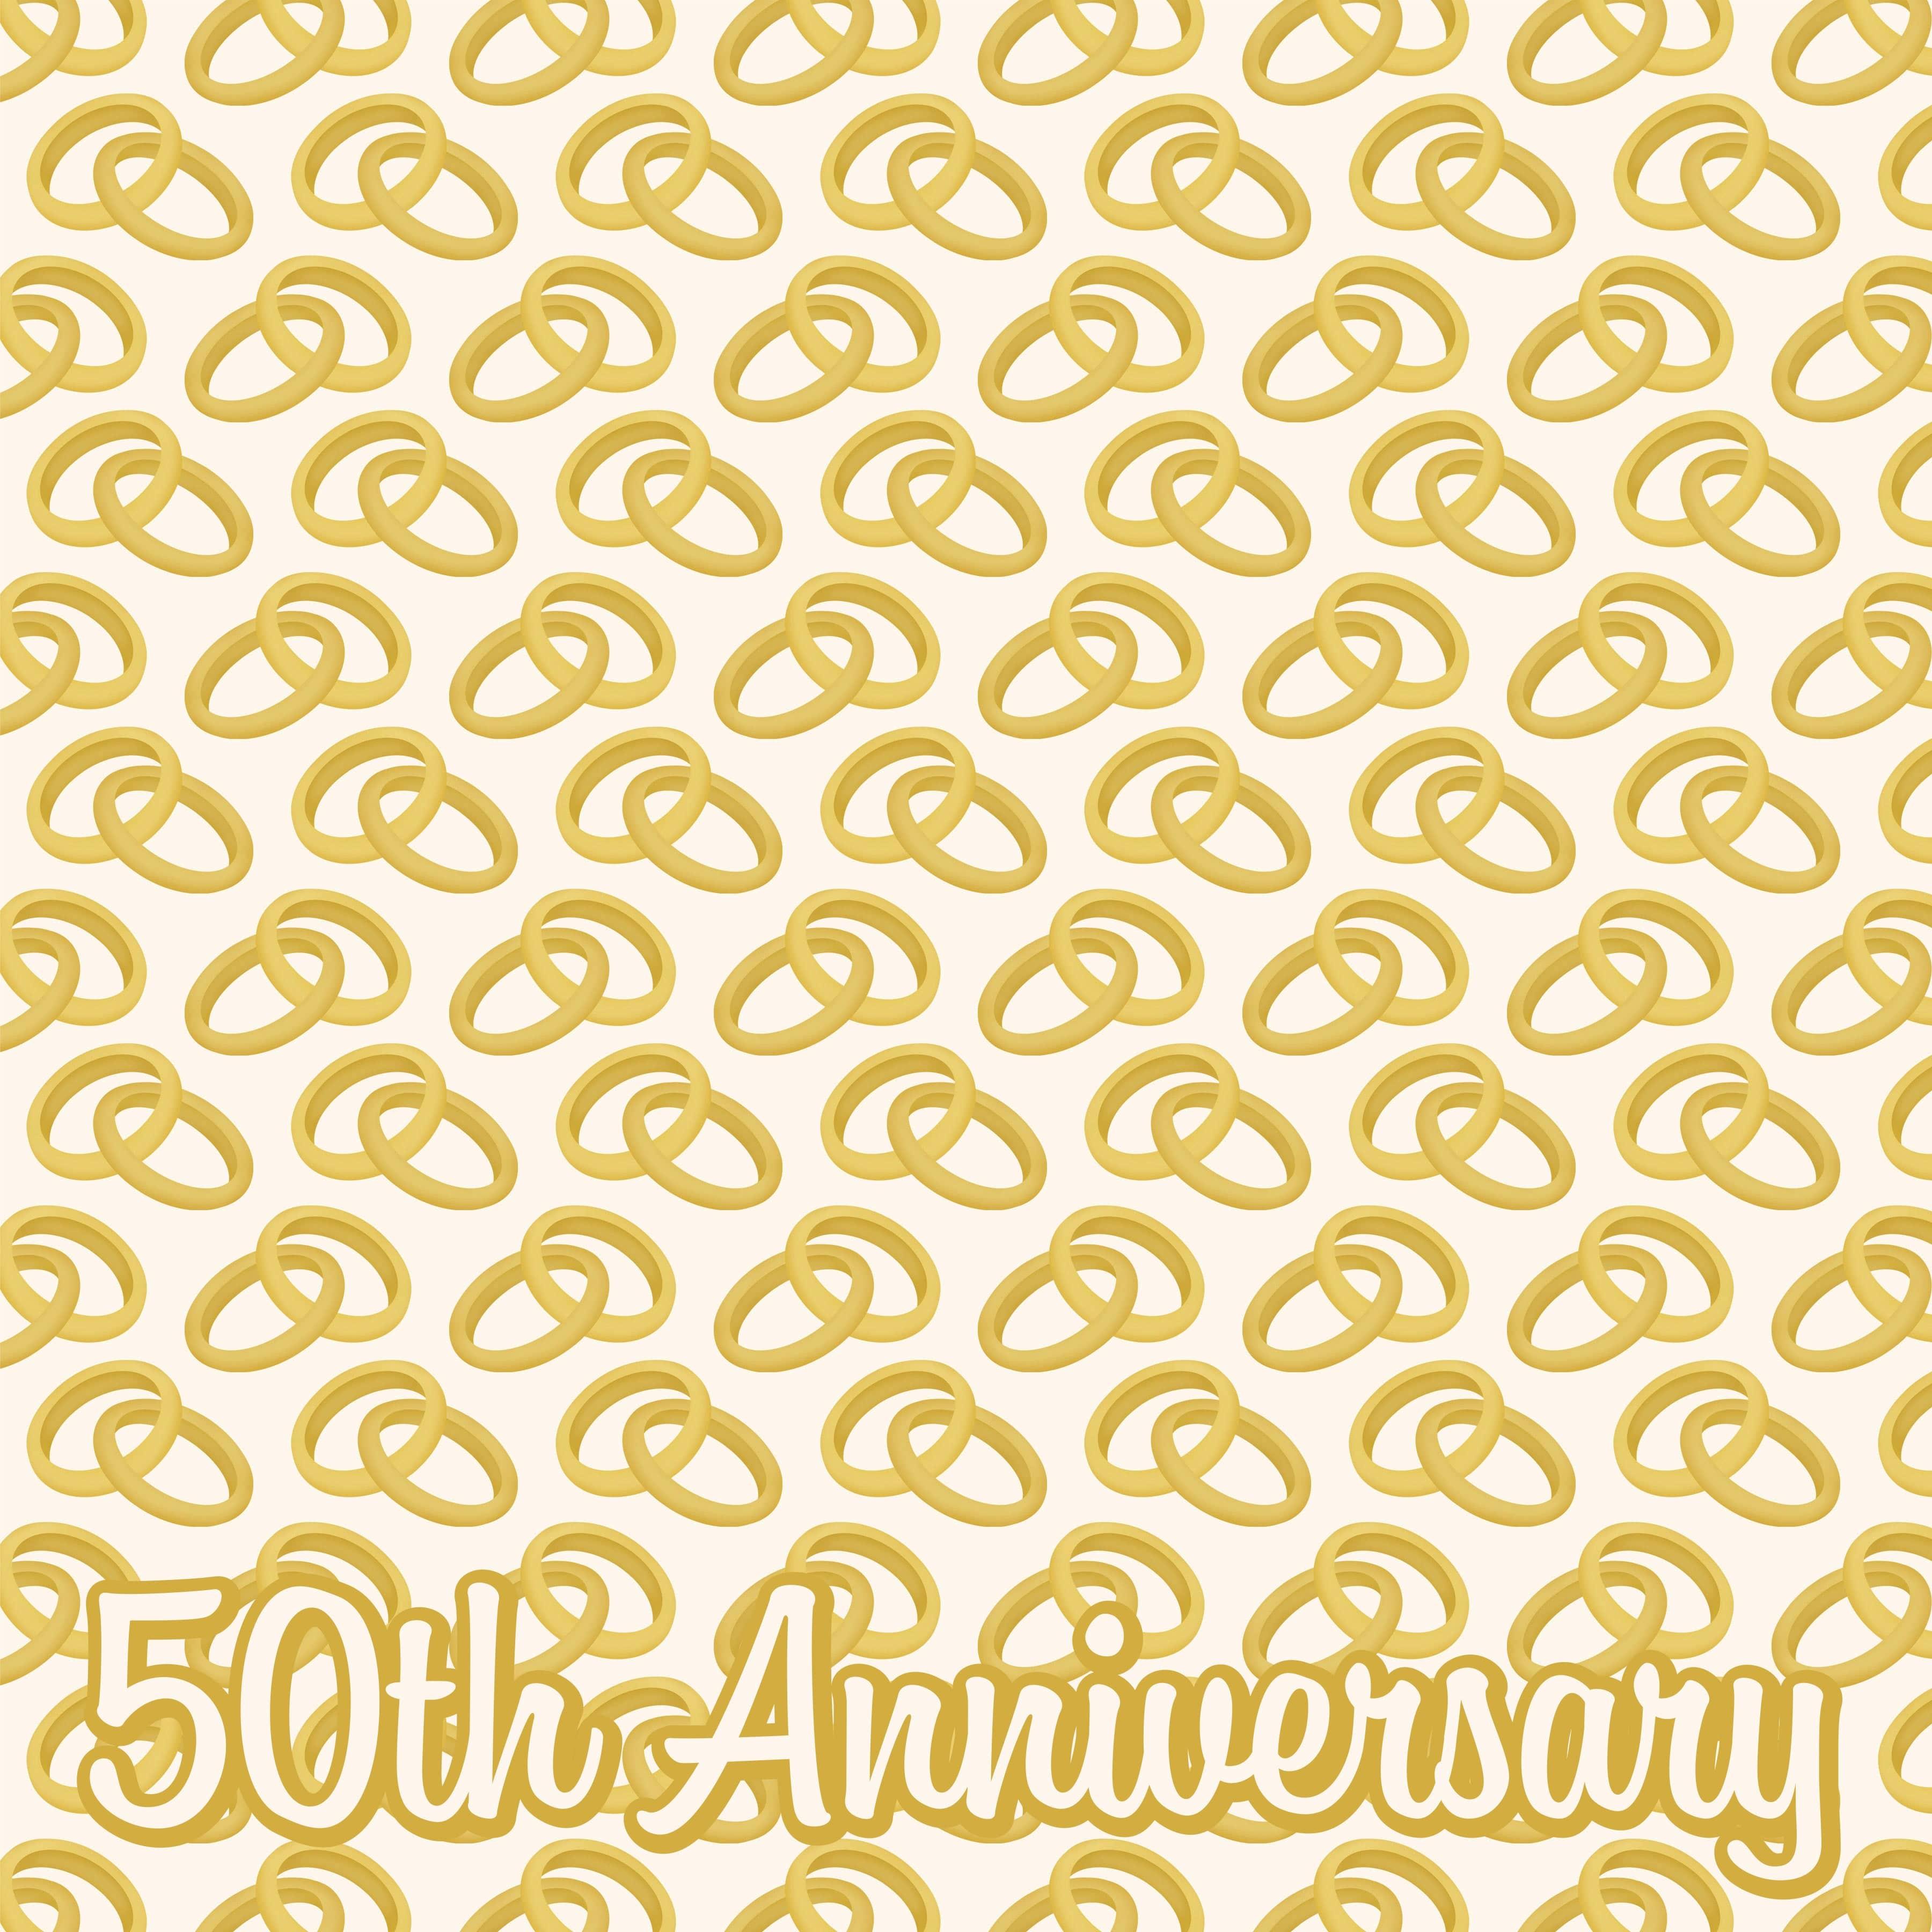 Lasting Love Collection 50th Anniversary 12 x 12 Double-Sided Scrapbook Paper by SSC Designs - Scrapbook Supply Companies